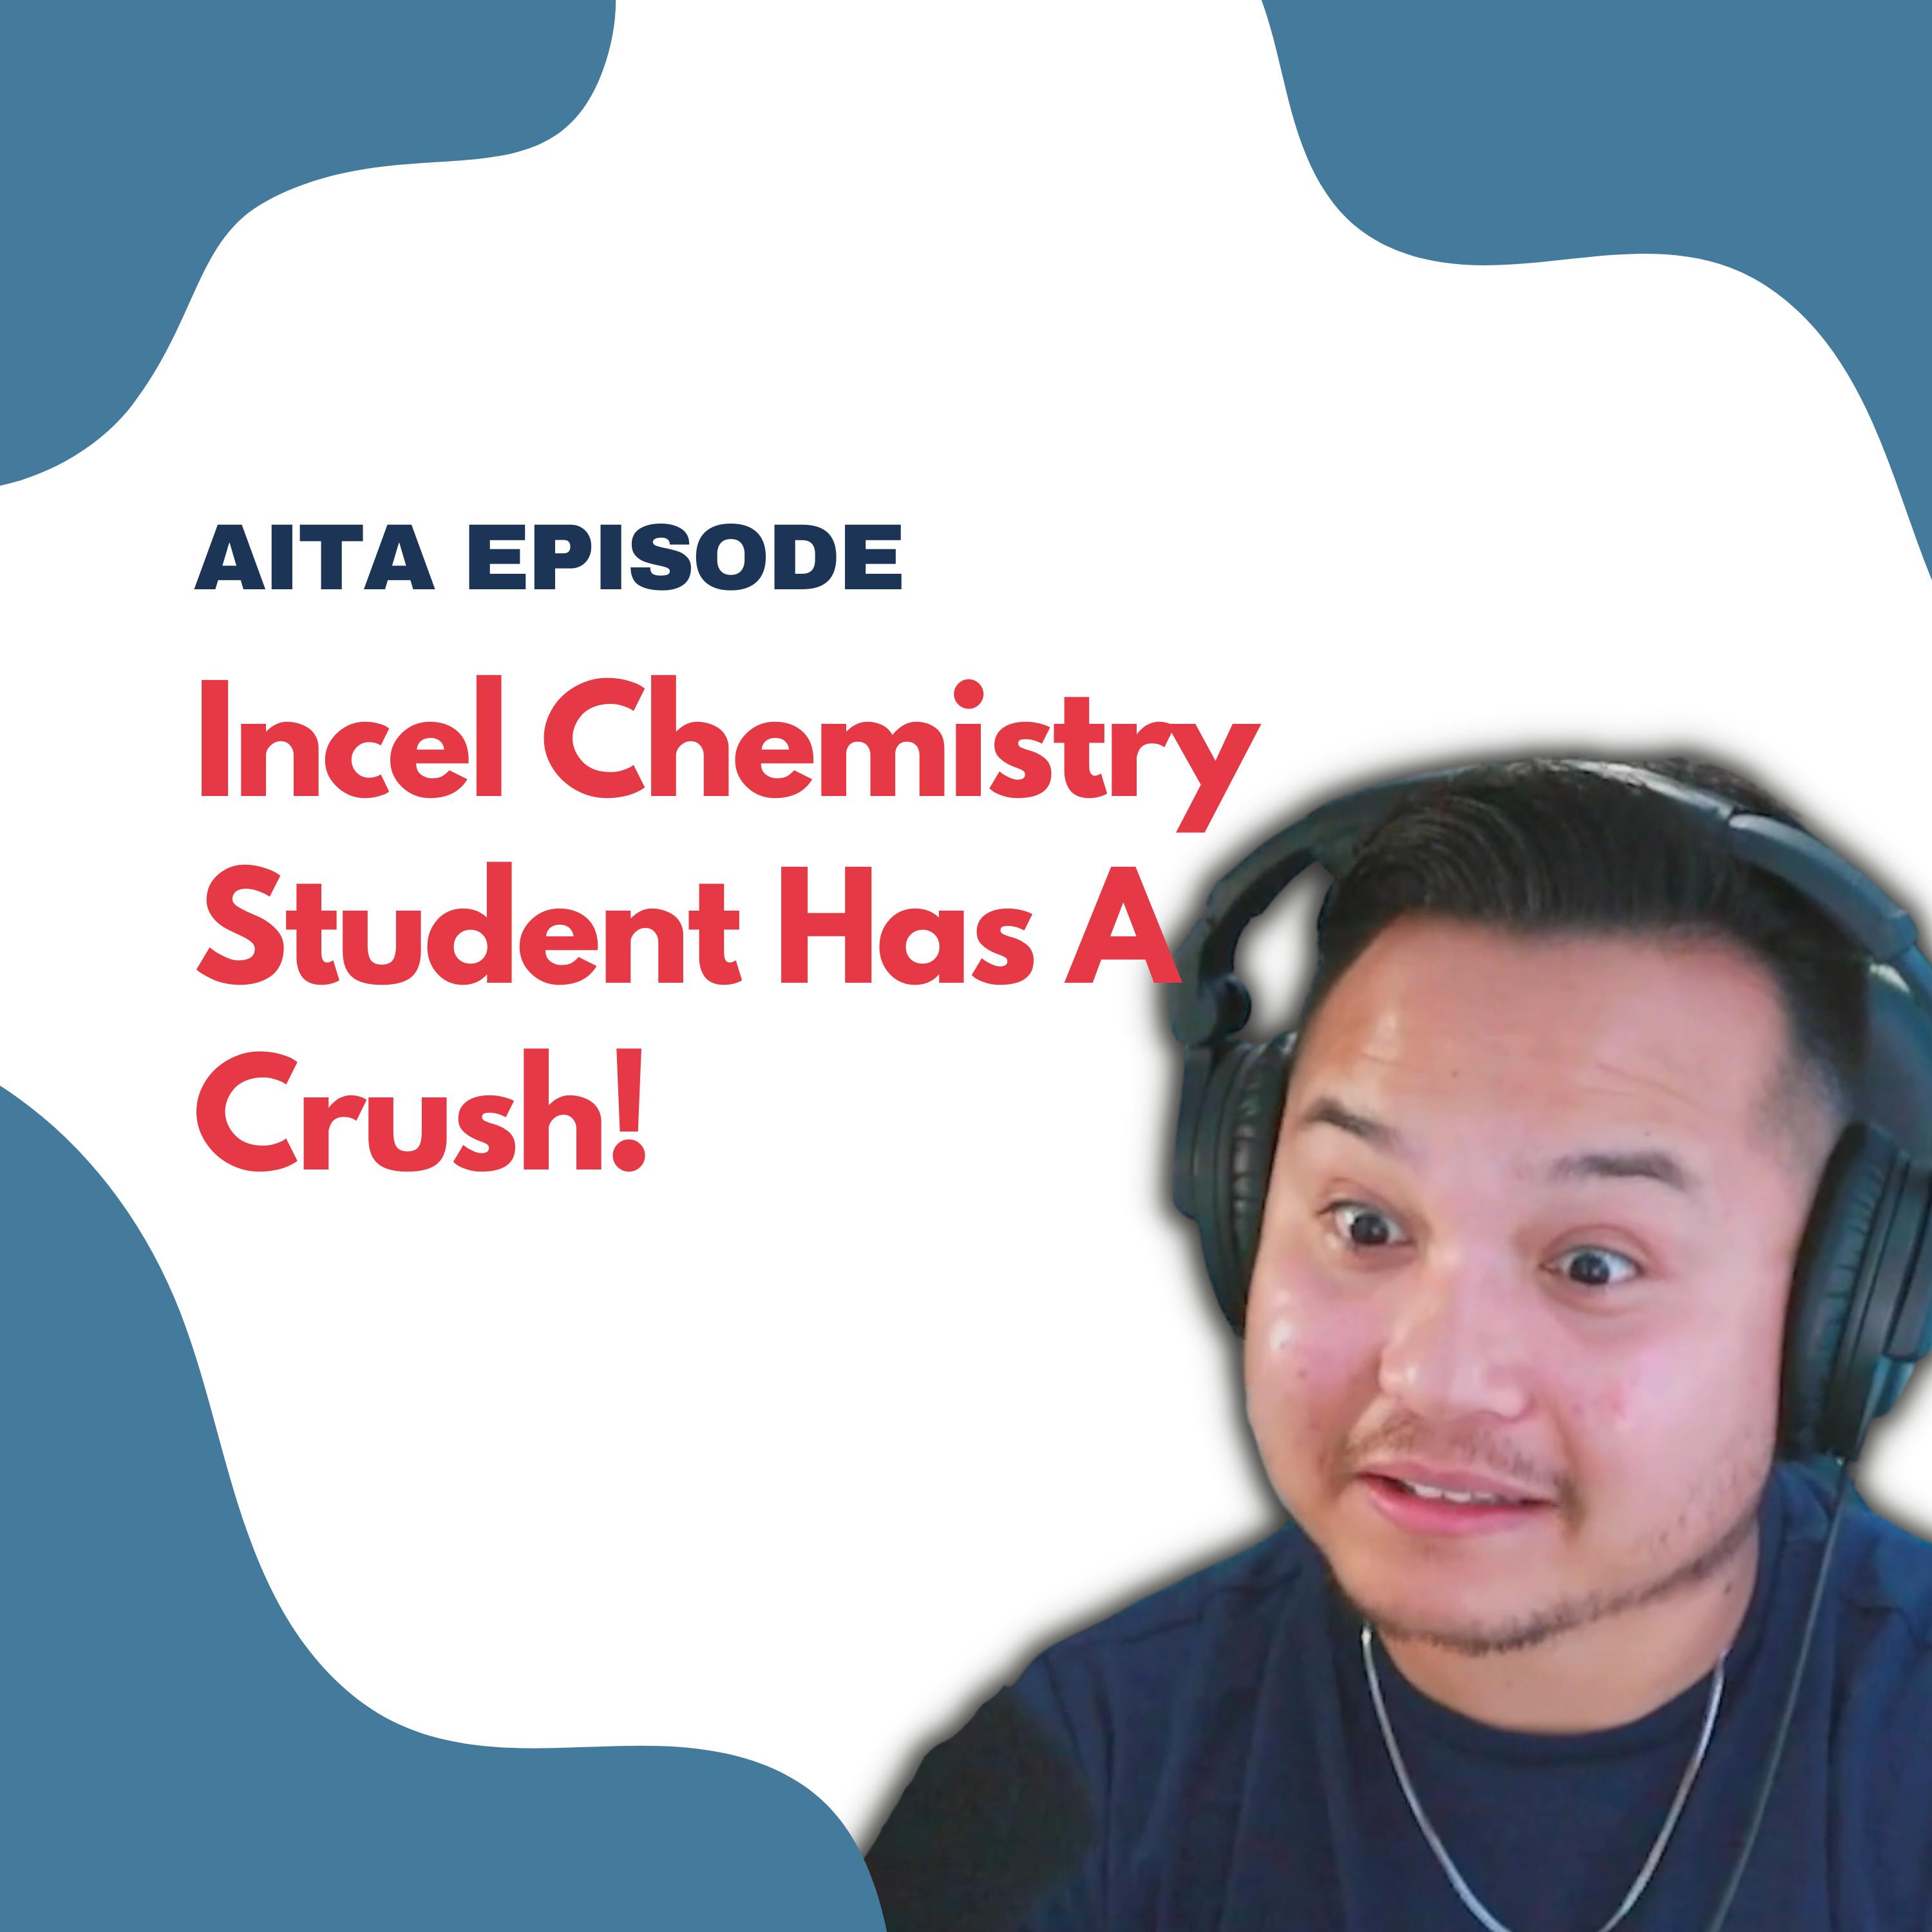 Incel Chemistry Student Has A Crush! | Am I The Asshole